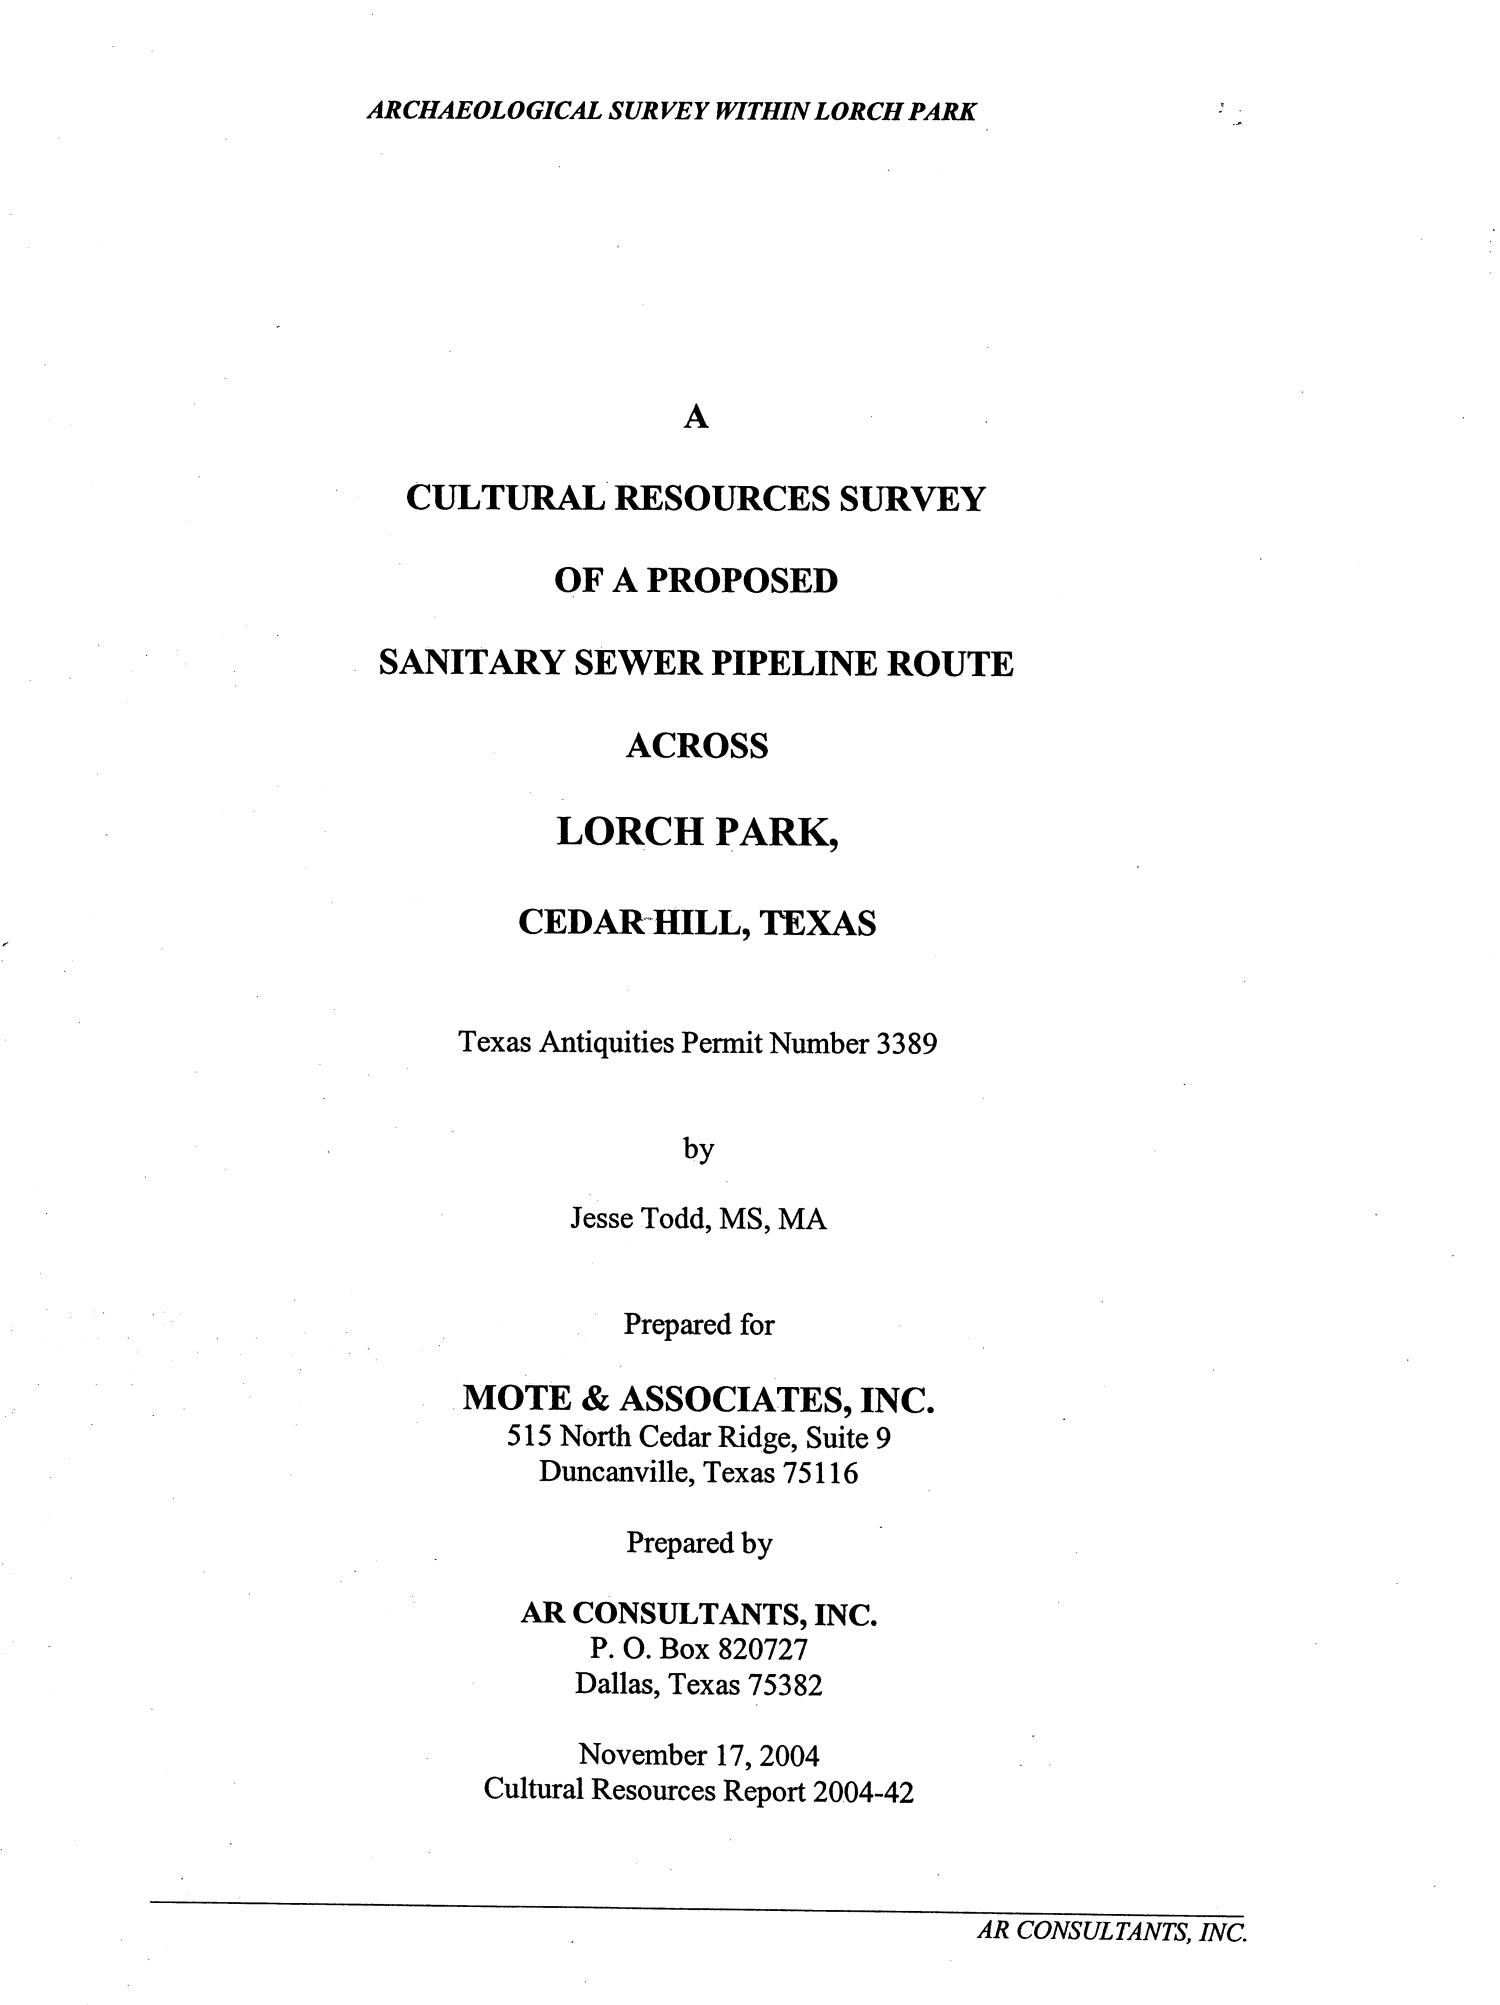 A Cultural Resources Survey of a Proposed Sanitary Sewer Pipeline Route Across Lorch Park, Cedar Hill, Texas
                                                
                                                    Title Page
                                                